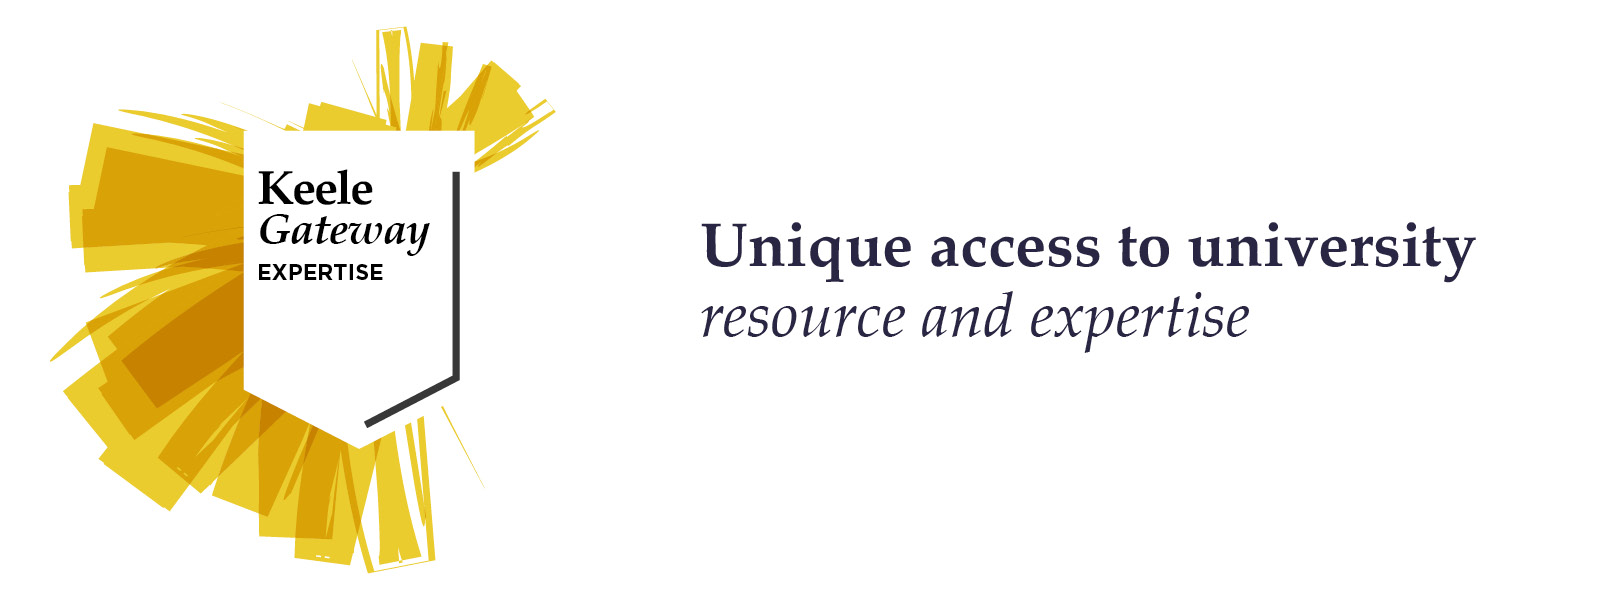 Keele Gateway Expertise, unique access to university resources and expertise 